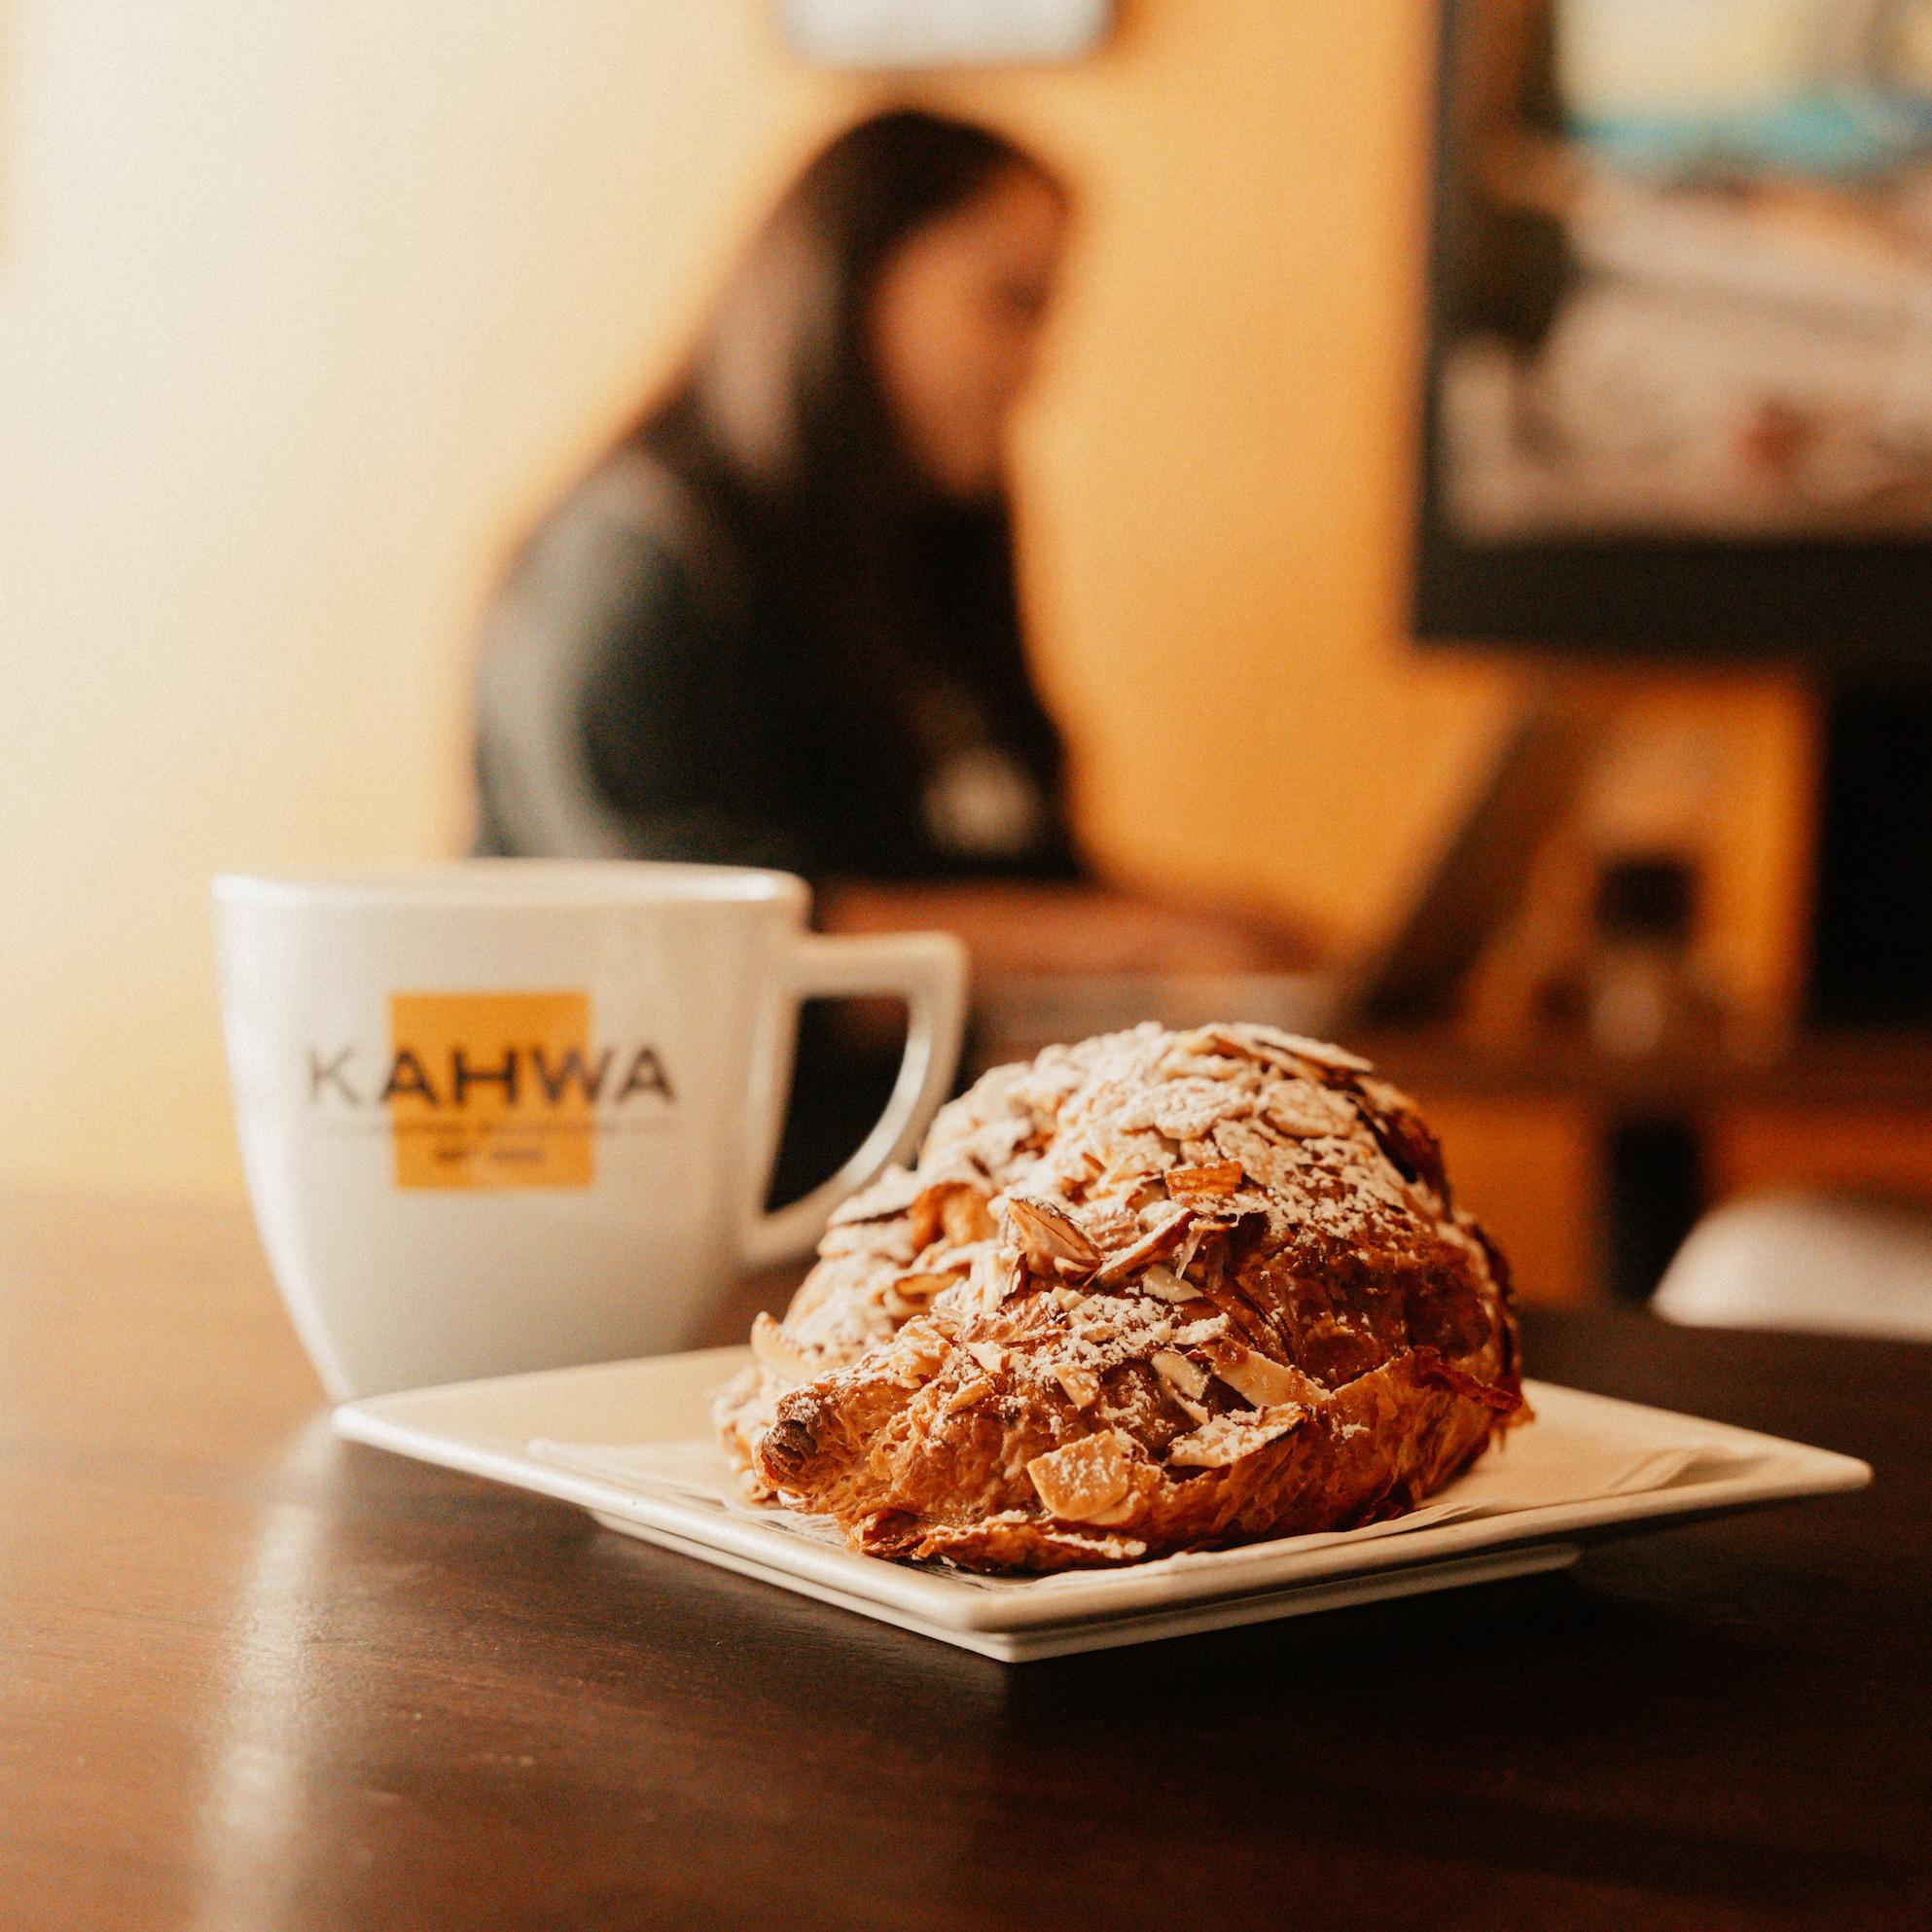 Kahwa Coffee and almond croissant